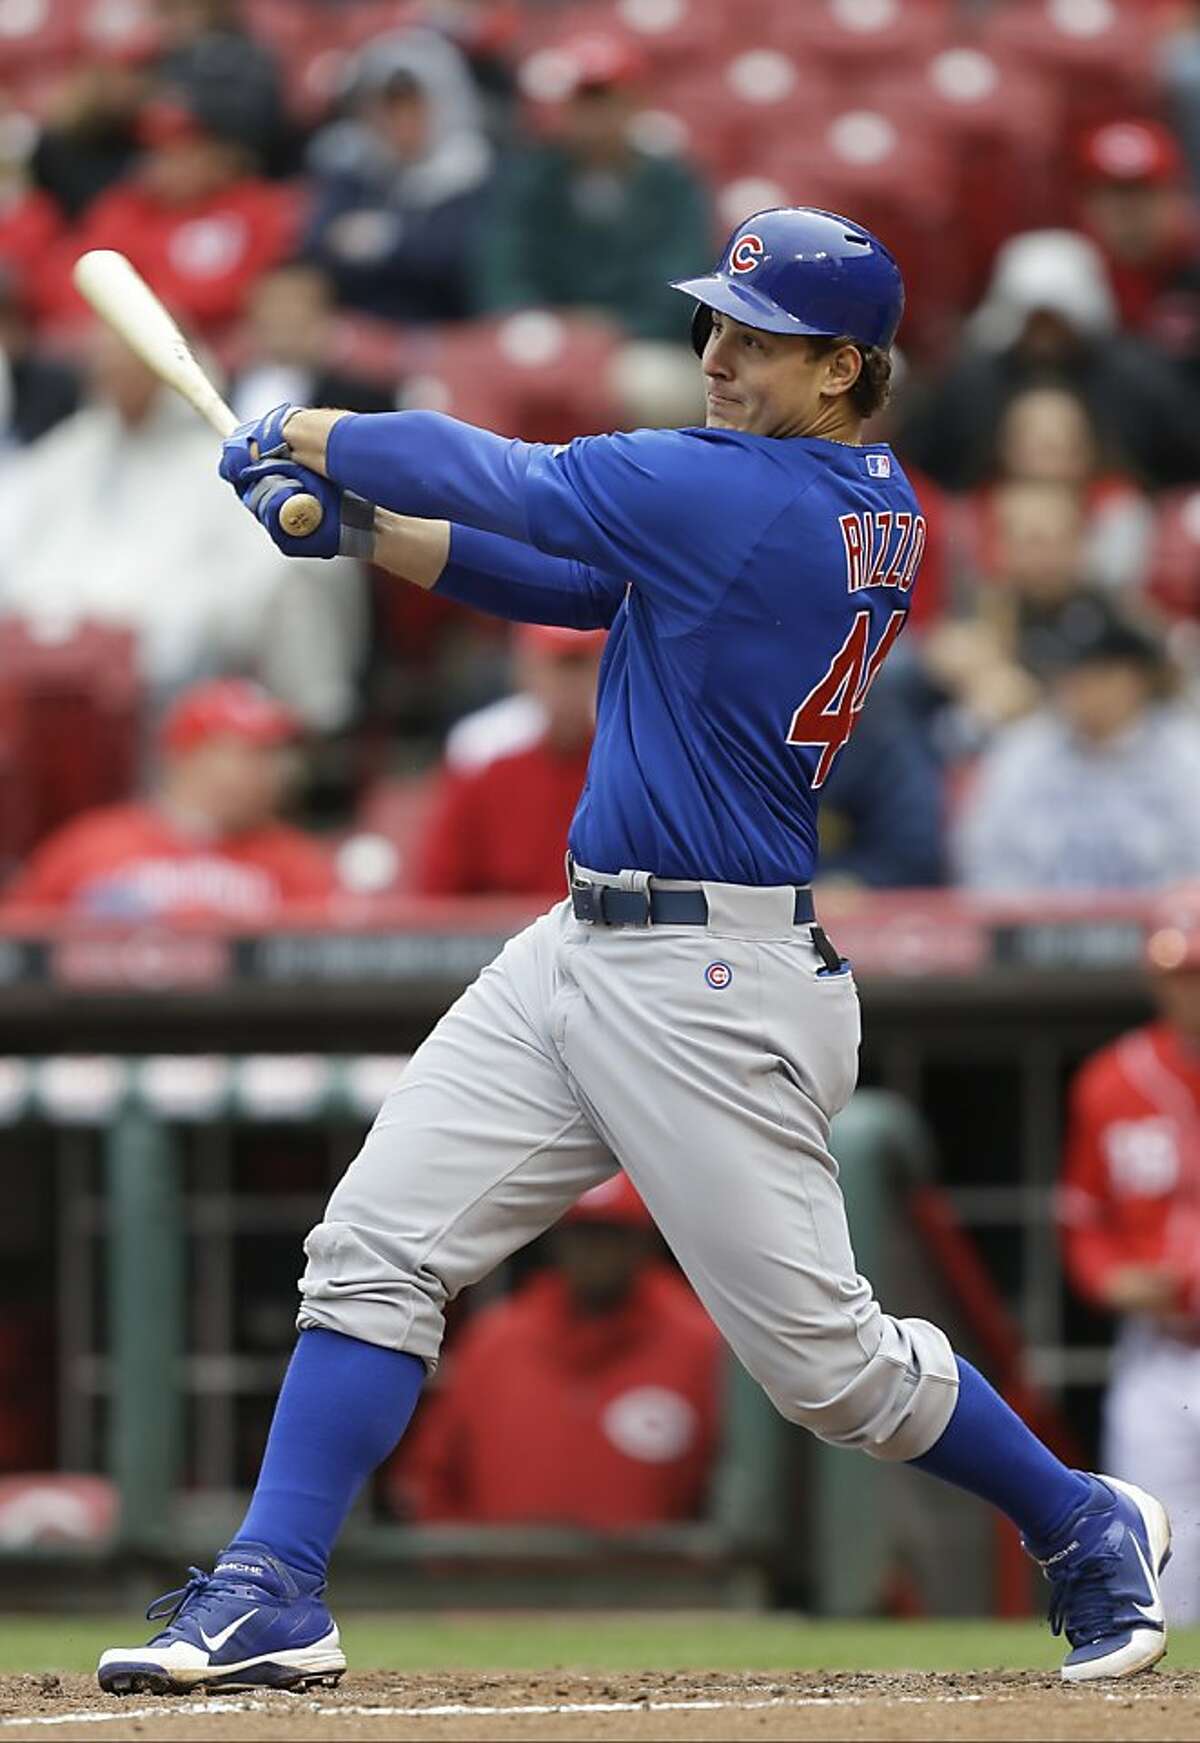 Chicago Cubs' Anthony Rizzo bats against the Cincinnati Reds in a baseball game, Wednesday, April 24, 2013, in Cincinnati. (AP Photo/Al Behrman)